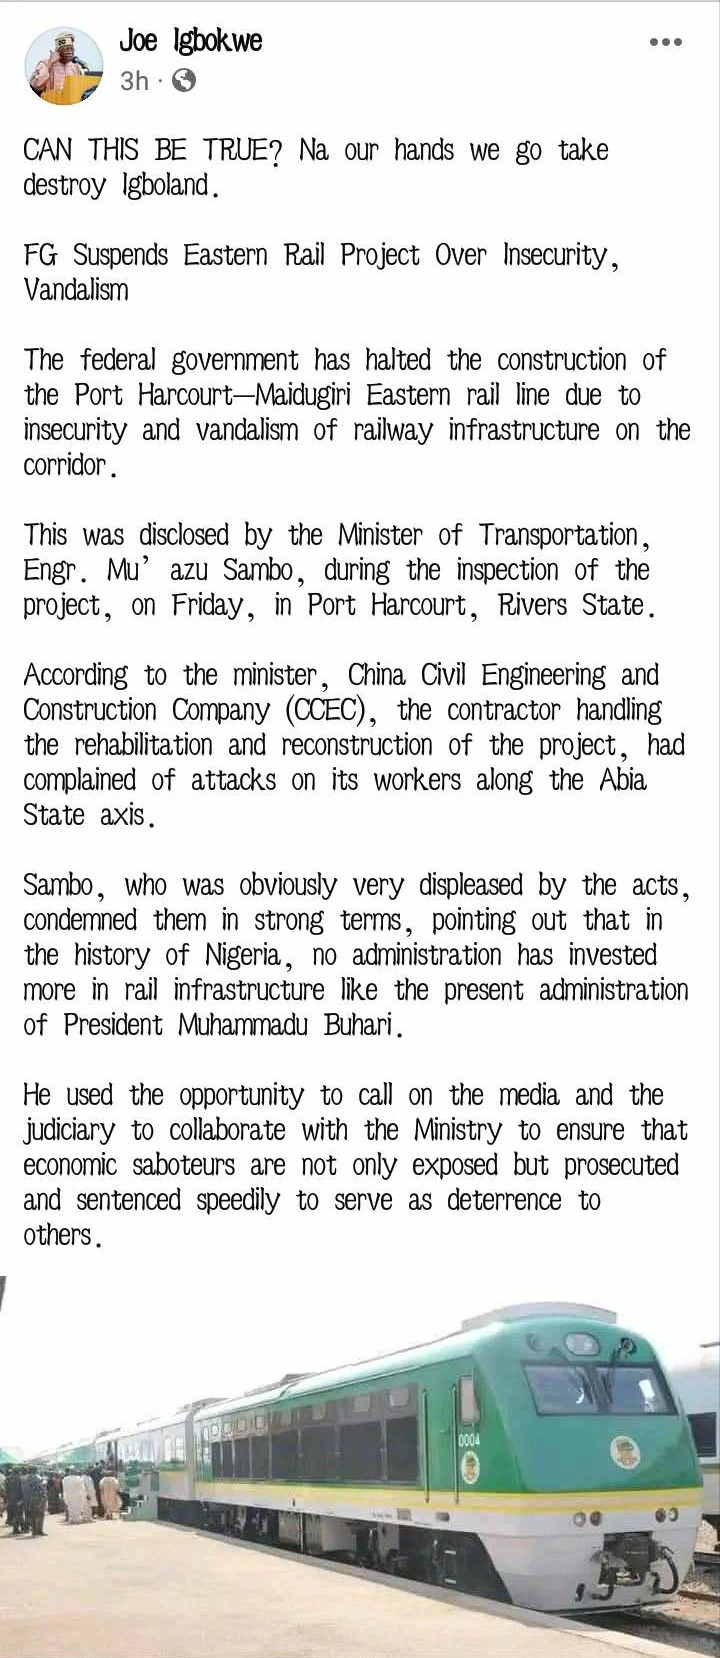 Joe Igbokwe Reacts As Federal Government Suspends Eastern Railway Construction Project